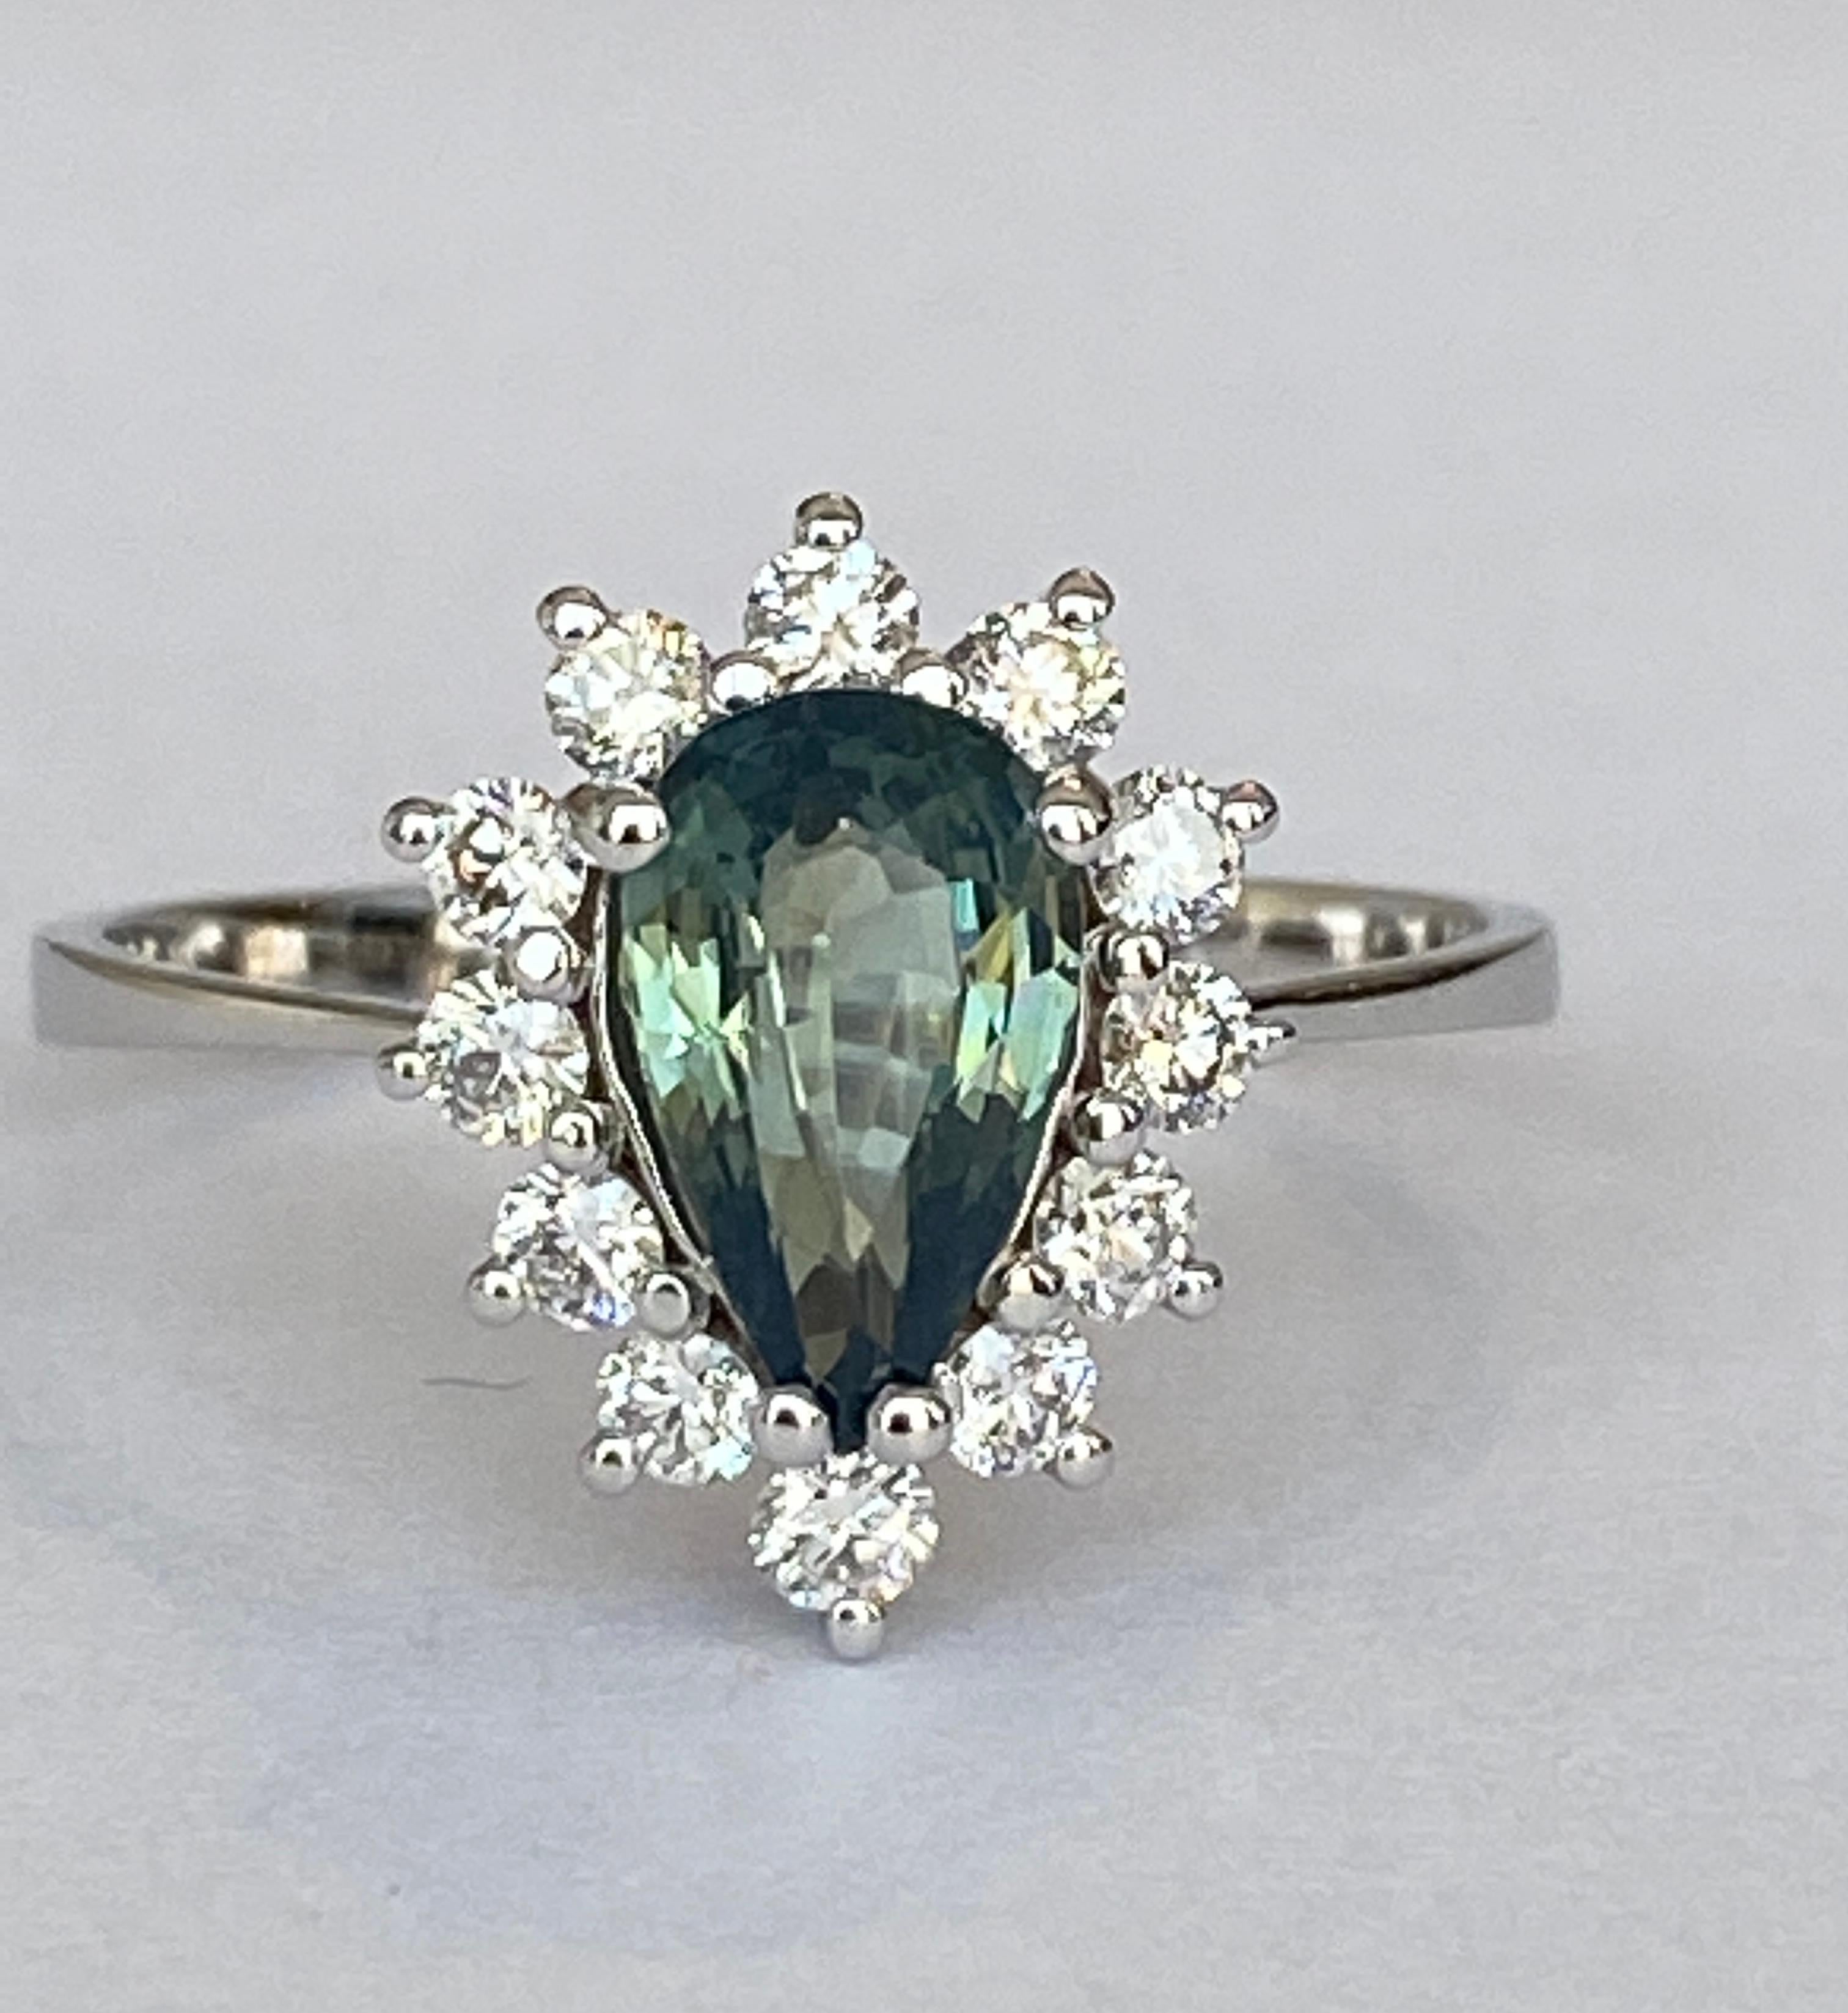 Offered in new condition, 18 kt white gold entourage ring with a pear-cut green sapphire of 1.53 ct in the center and surrounded by 12 brilliant-cut diamonds of approx. 0.40 ct of quality G/VS. Sapphire is unheated and Madagascar origin.
Content: